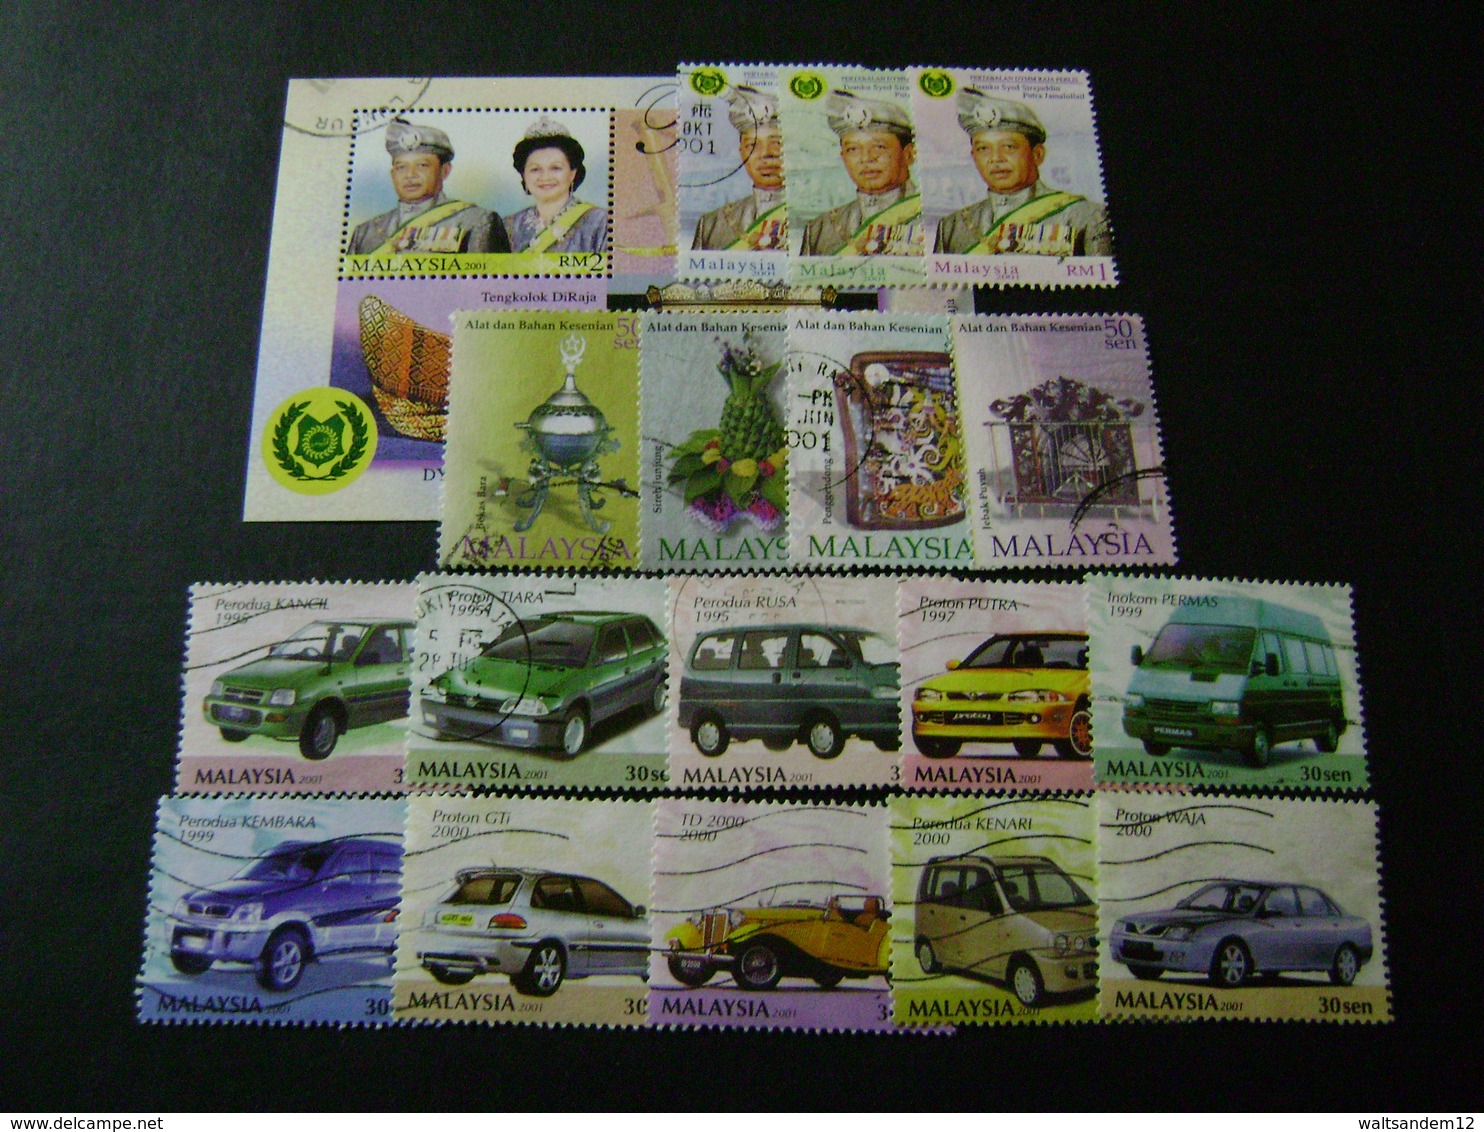 Malaysia 2001 Stamp Issues (between SG Ms998 And Ms1048 - See Description) 4 Images - Used [Sale Price] - Malaysia (1964-...)